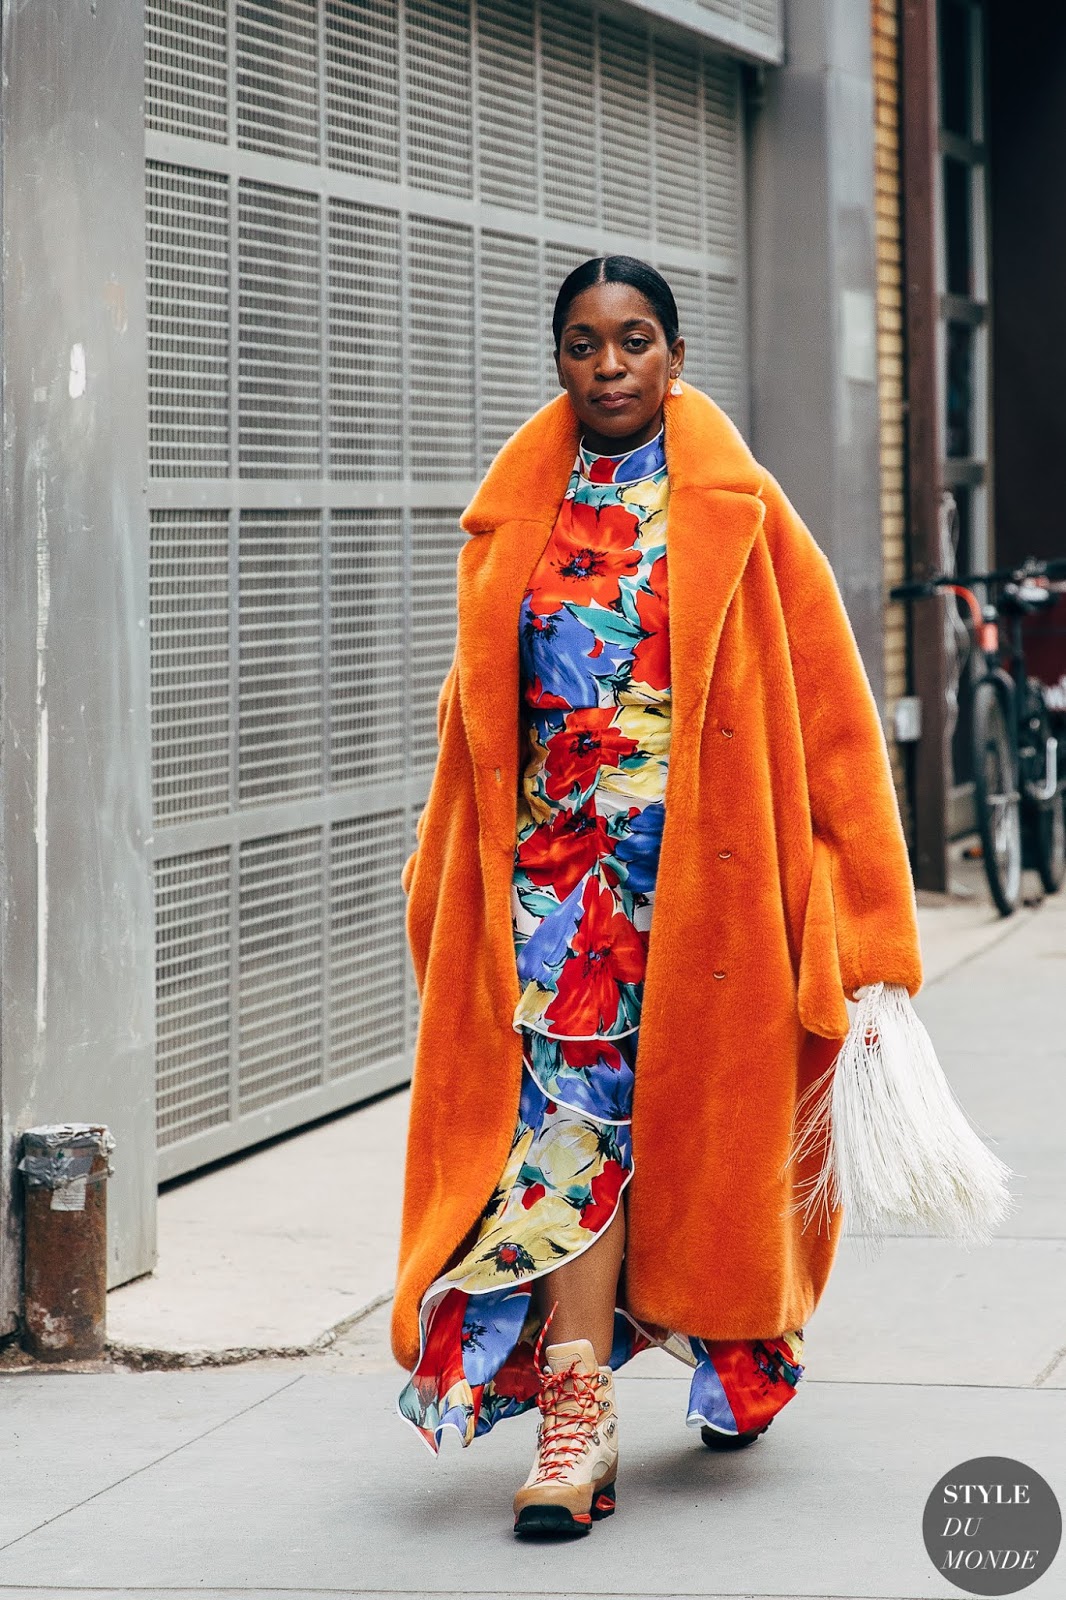 Shop the Colorful Coats Spotted All Over Fashion Week